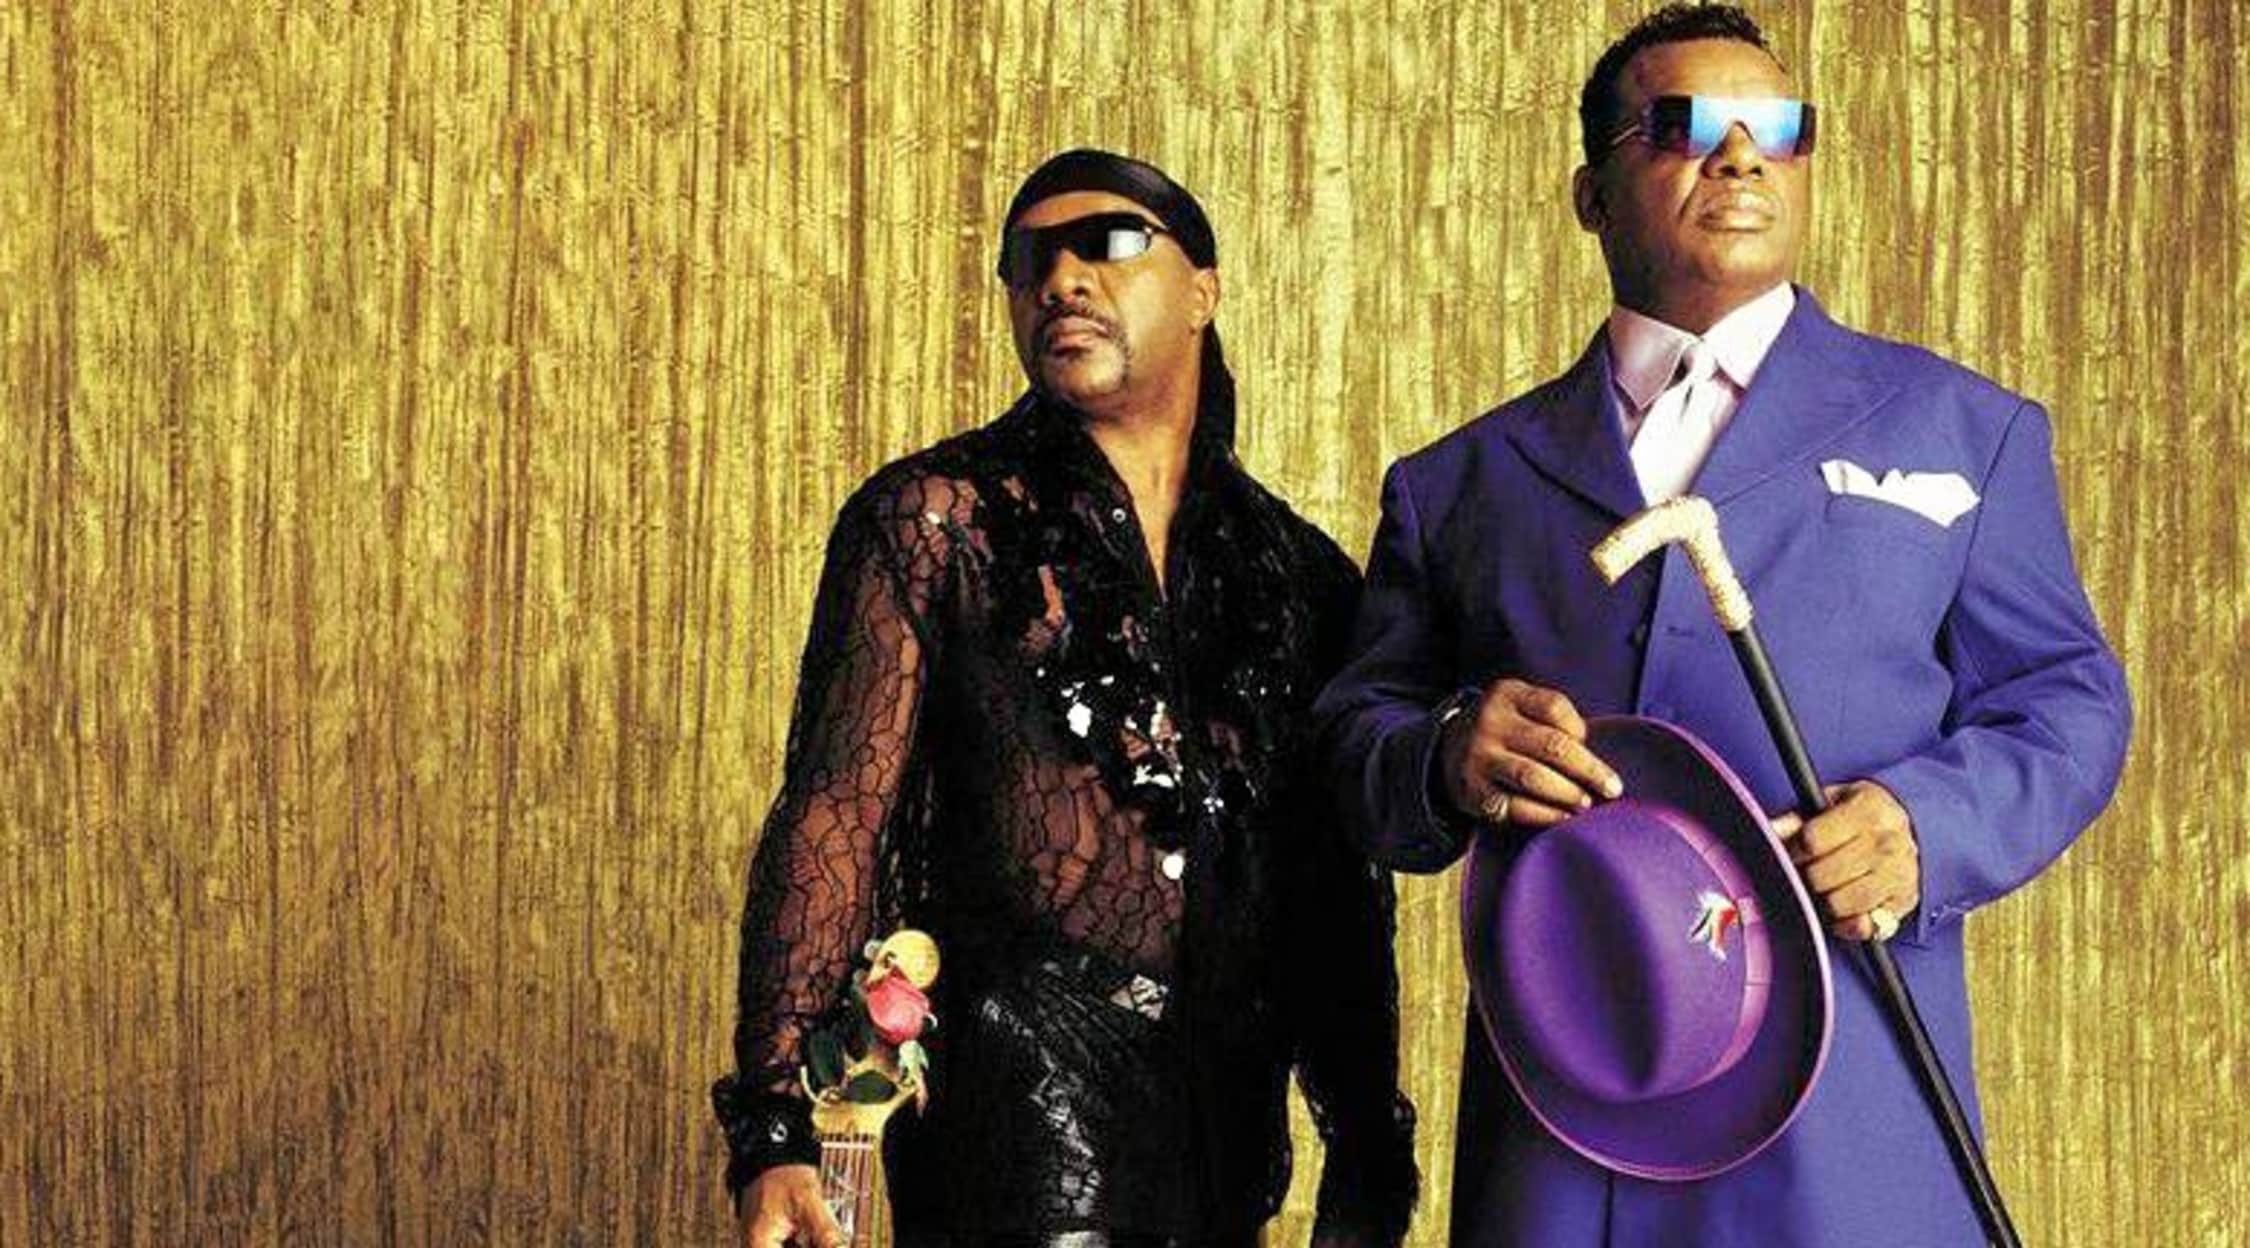 Isley Brothers Tickets Isley Brothers Concert Tickets and Tour Dates